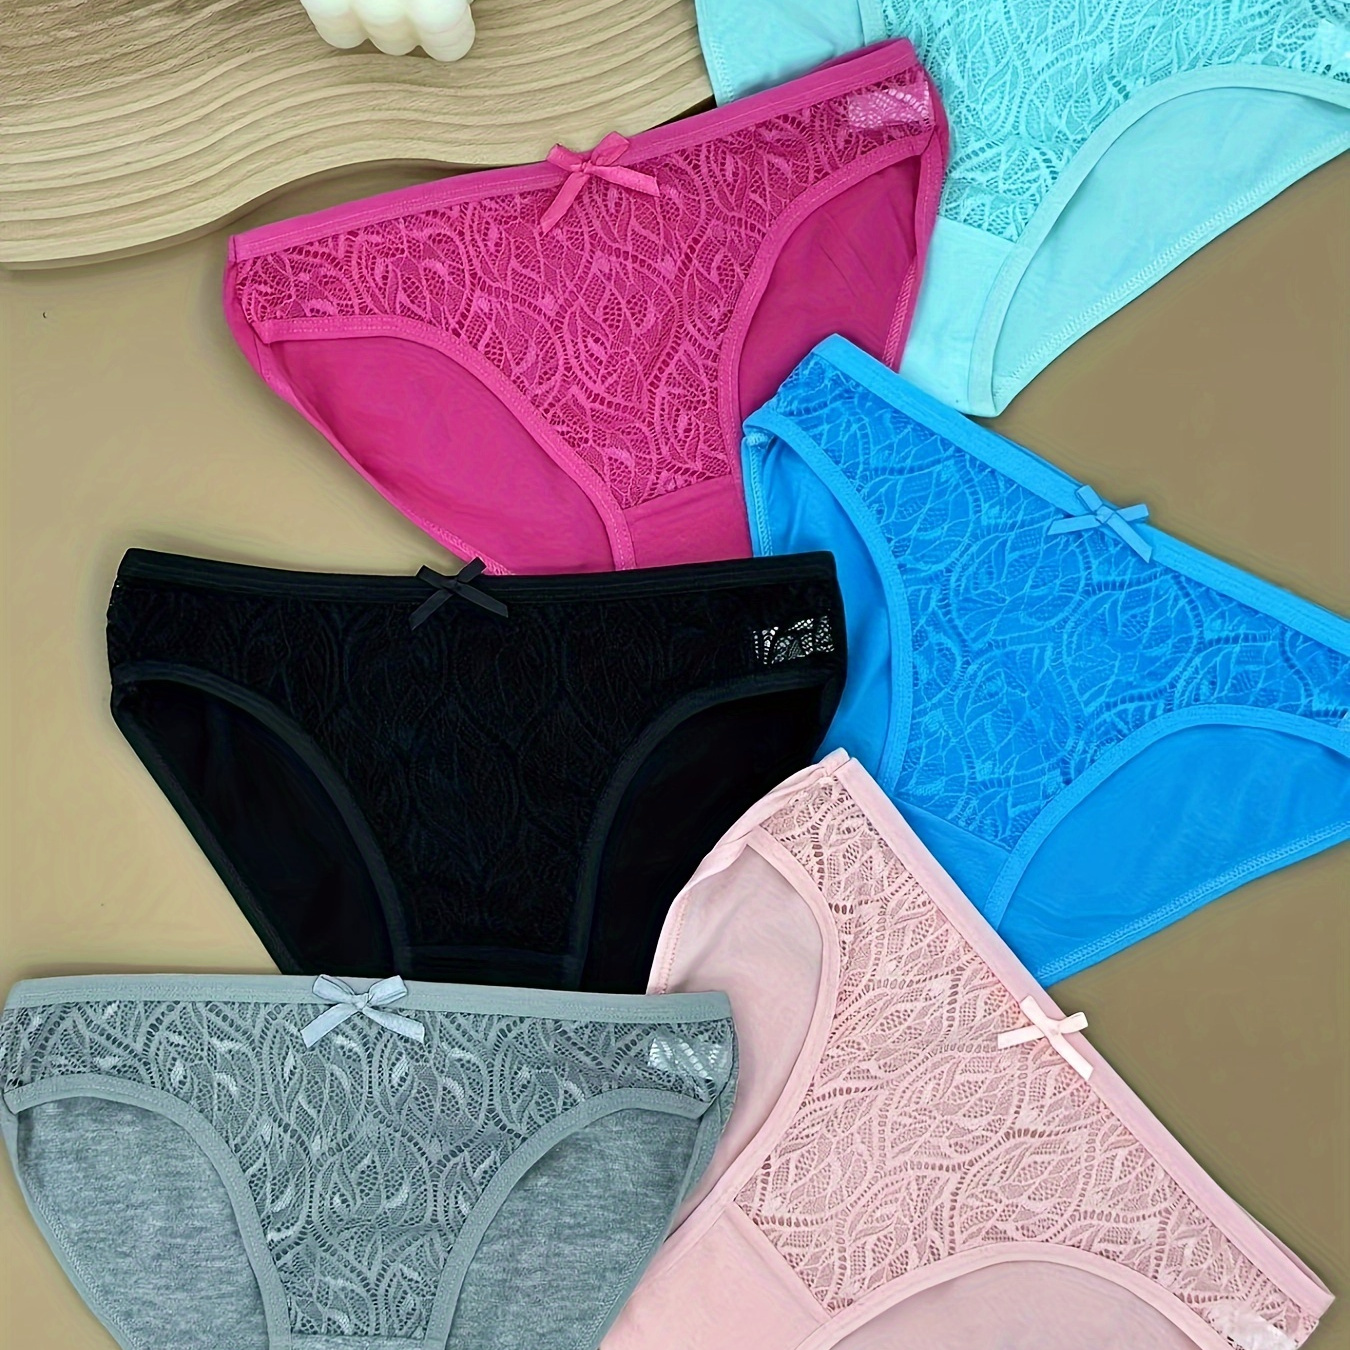 

6pcs Solid Contrast Lace Bow Briefs, Comfy Breathable Stretchy Intimates Panties, Women's Lingerie & Underwear